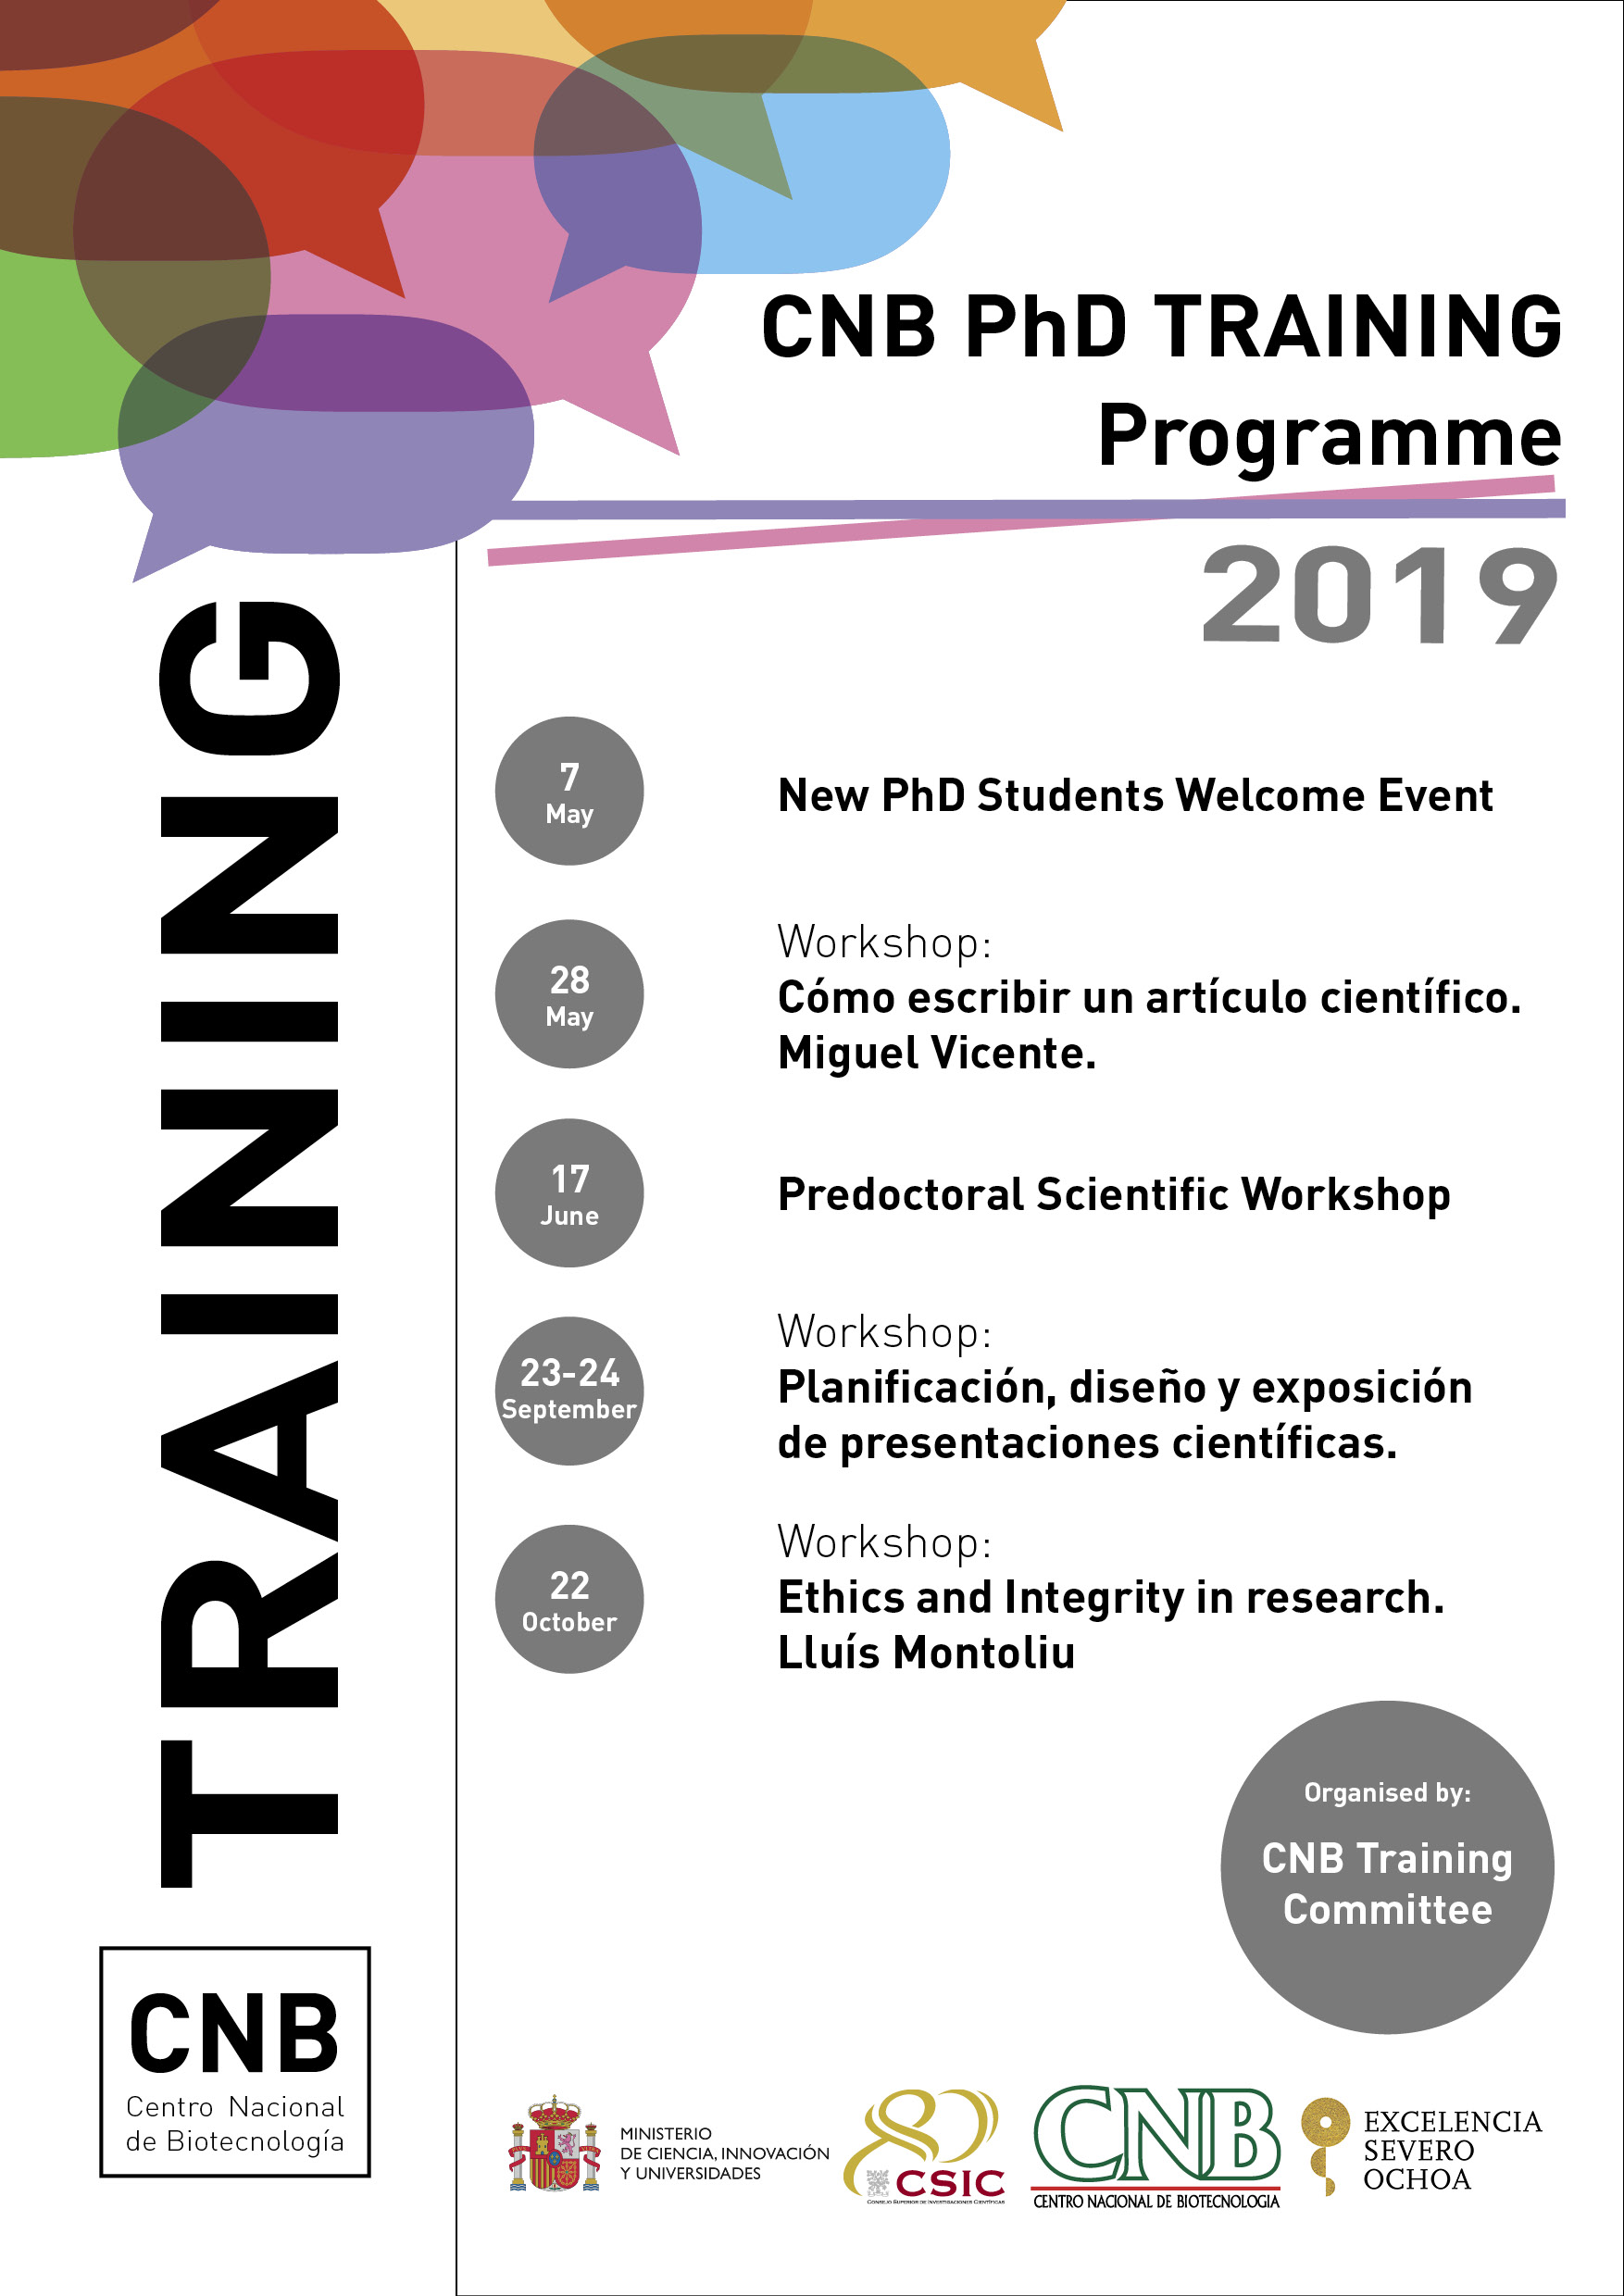 training courses for phd students